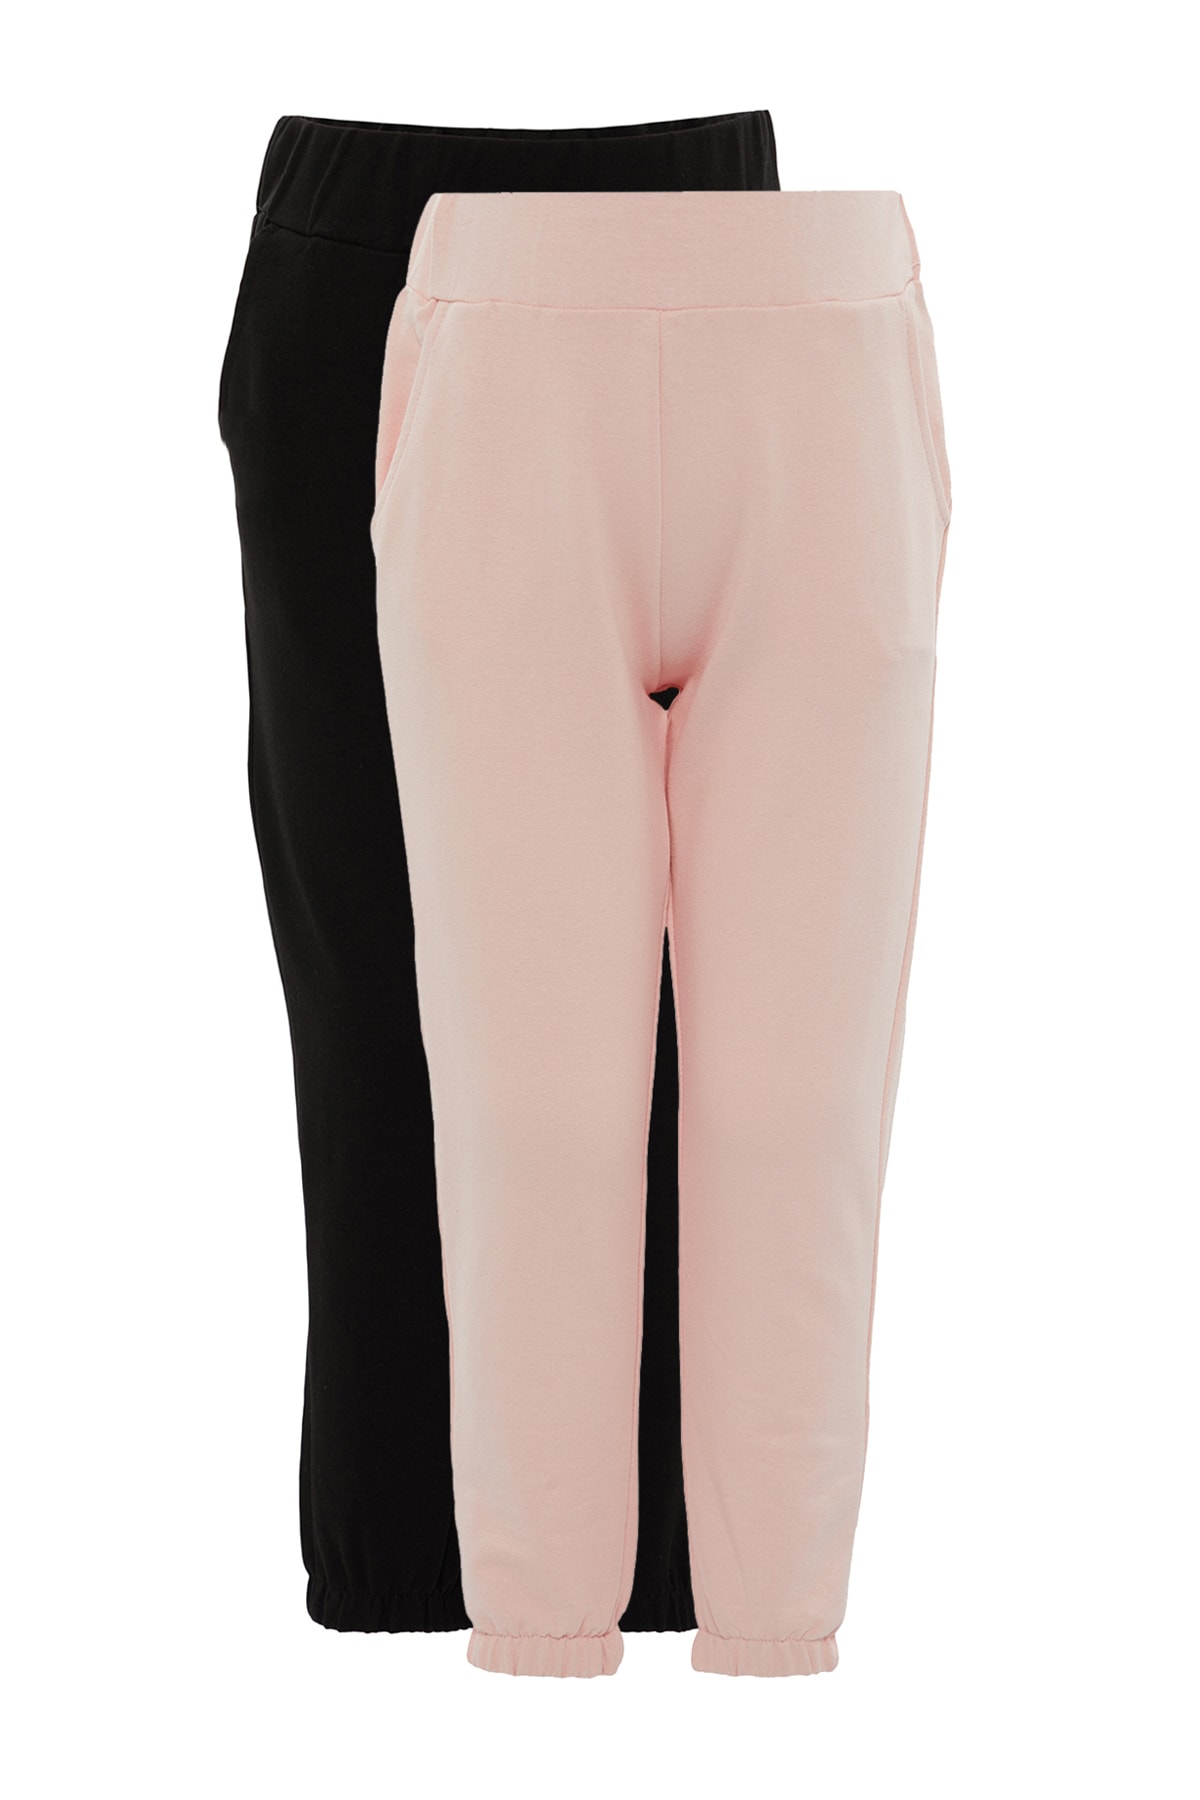 Trendyol Black-Pink 2-Pack Girls' Knitted Thin Sweatpants